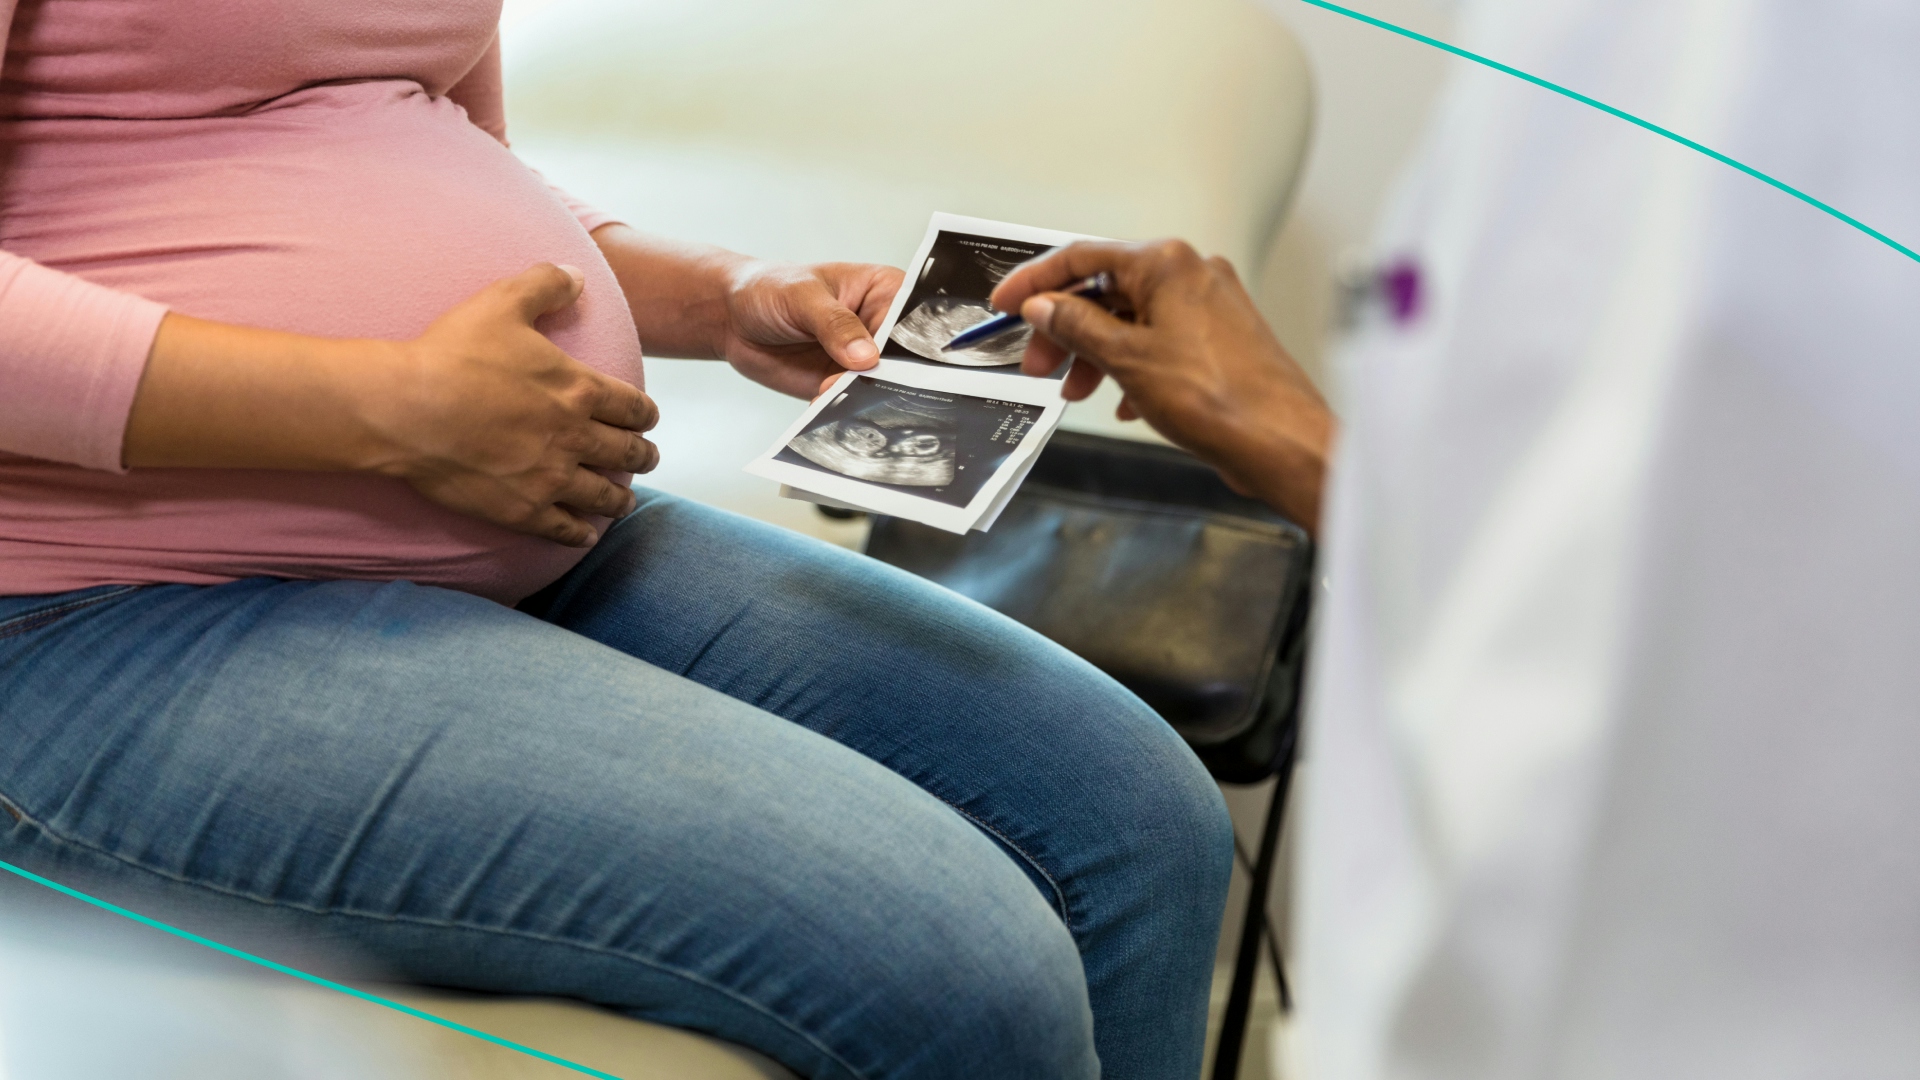 As the unrecognizable pregnant woman holds the ultrasound pictures, the unrecognizable female doctor uses her pen to point out details.